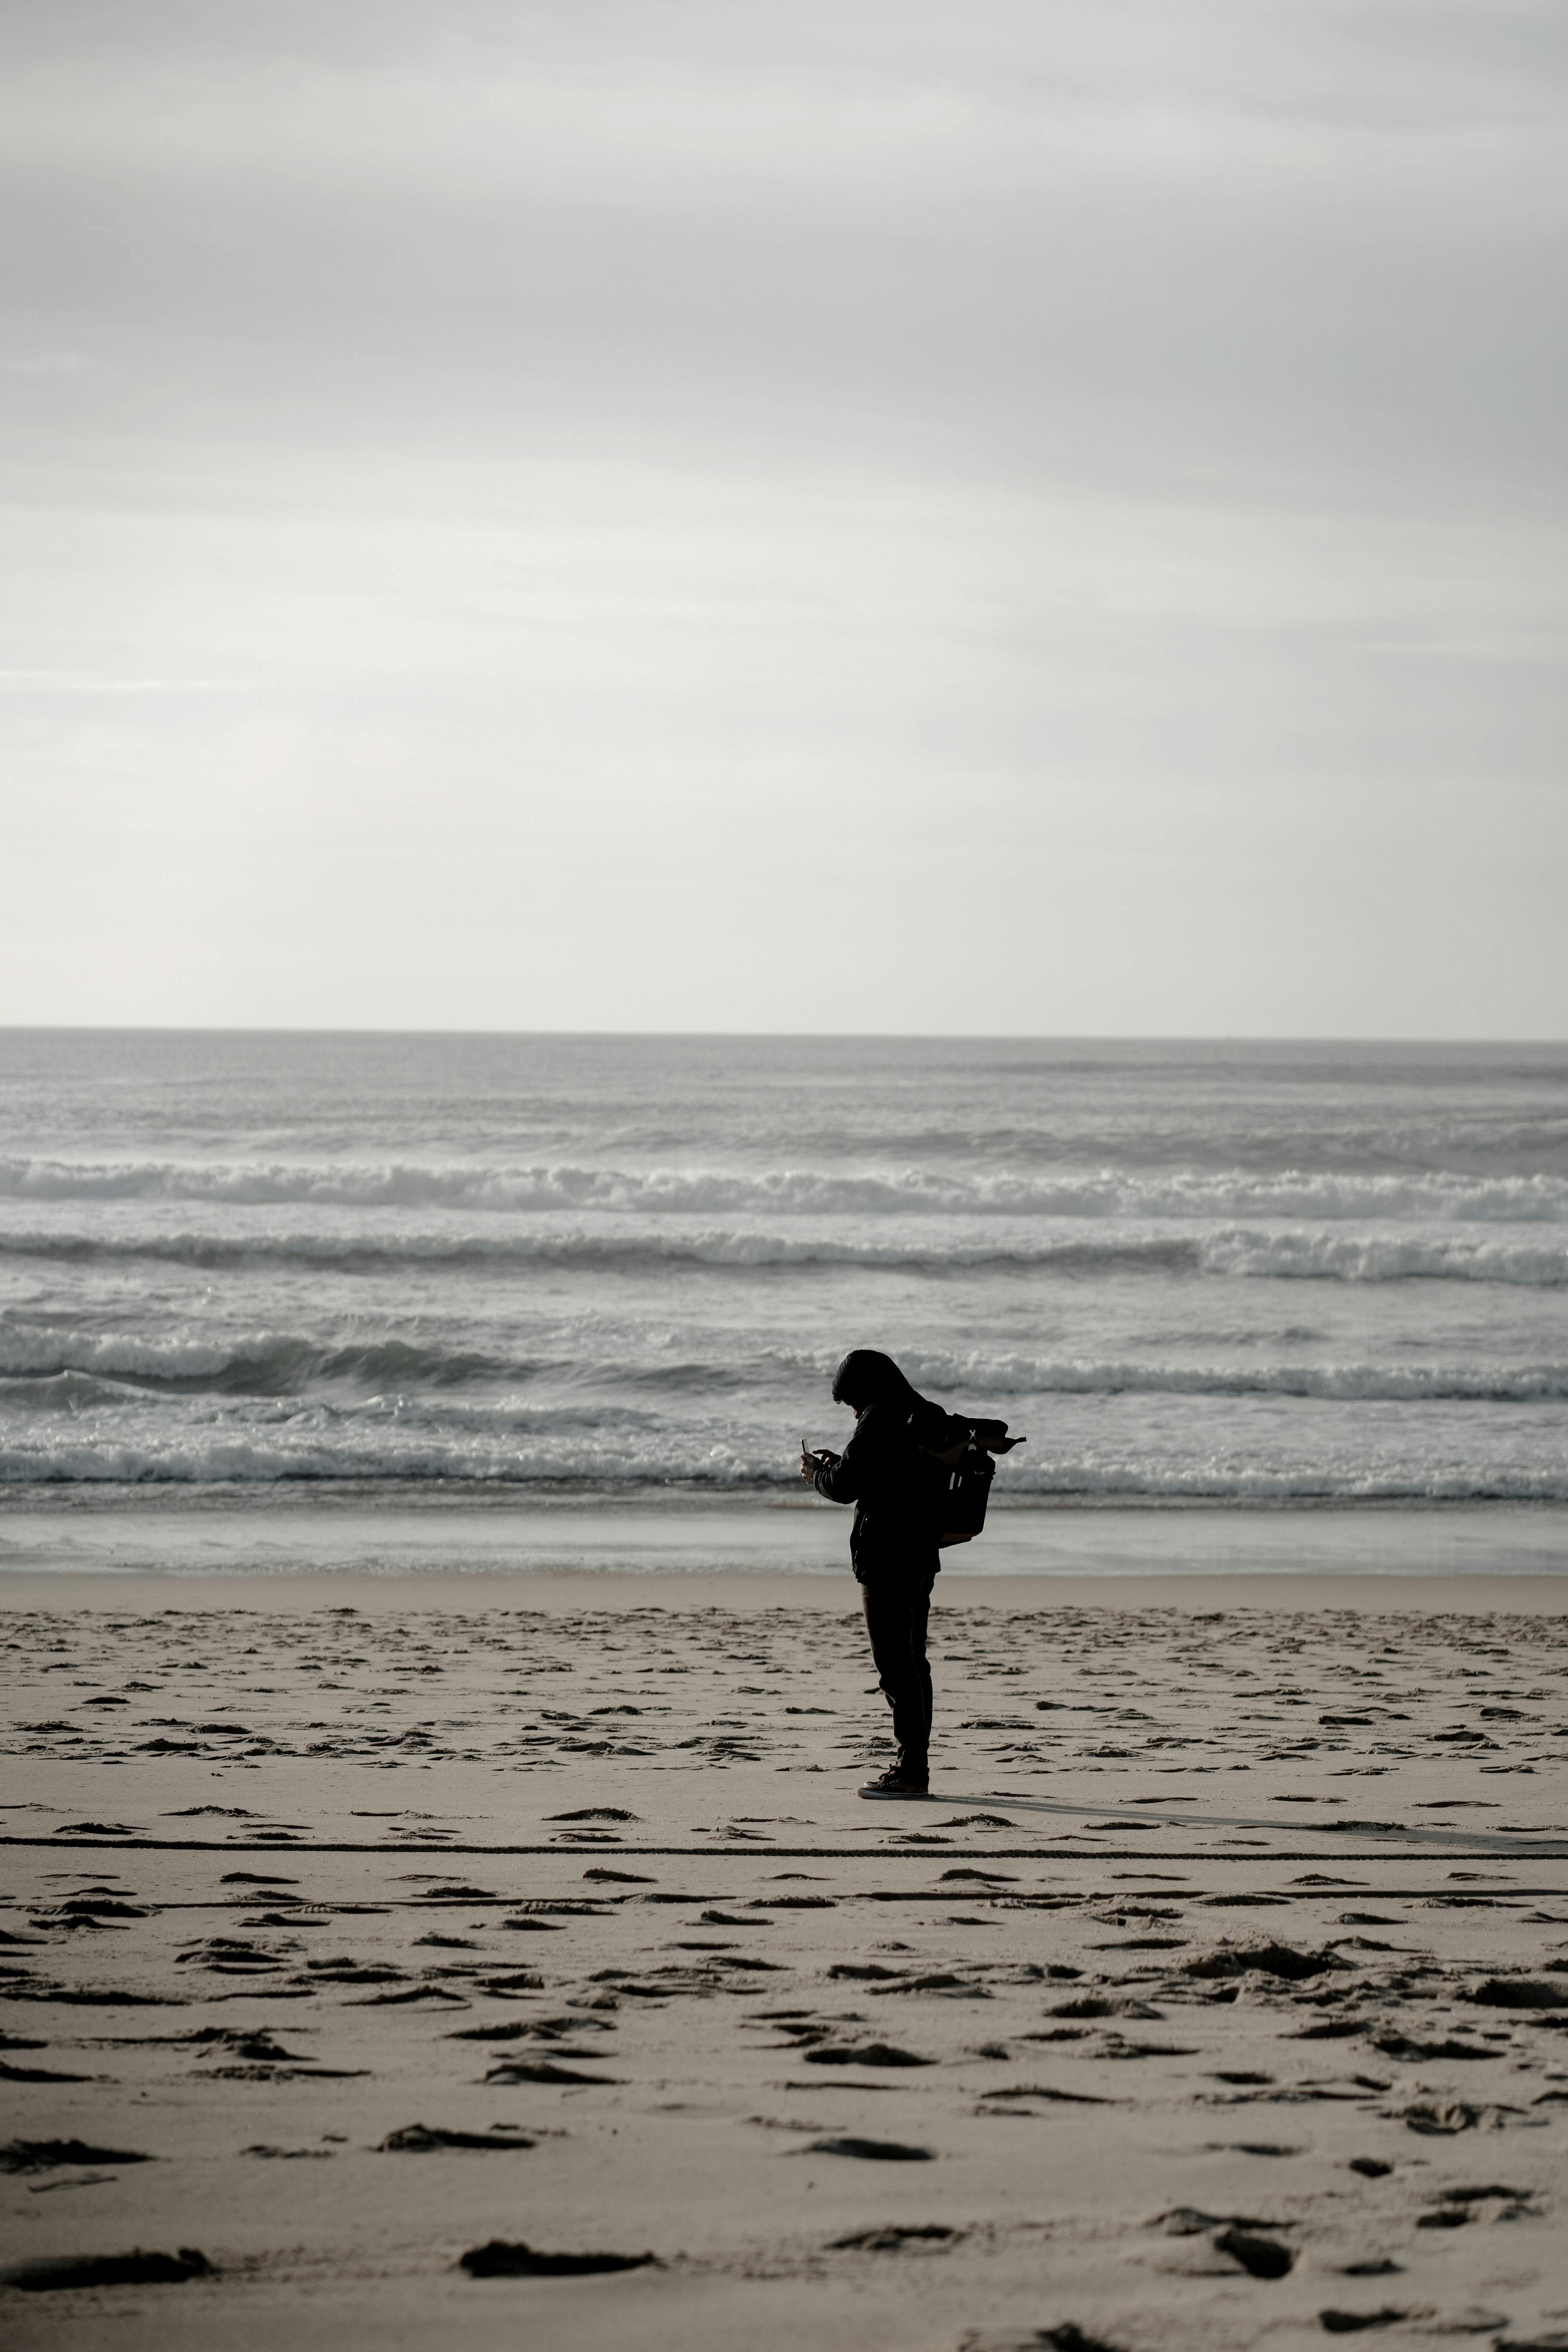 A person standing on a beach examining a chart